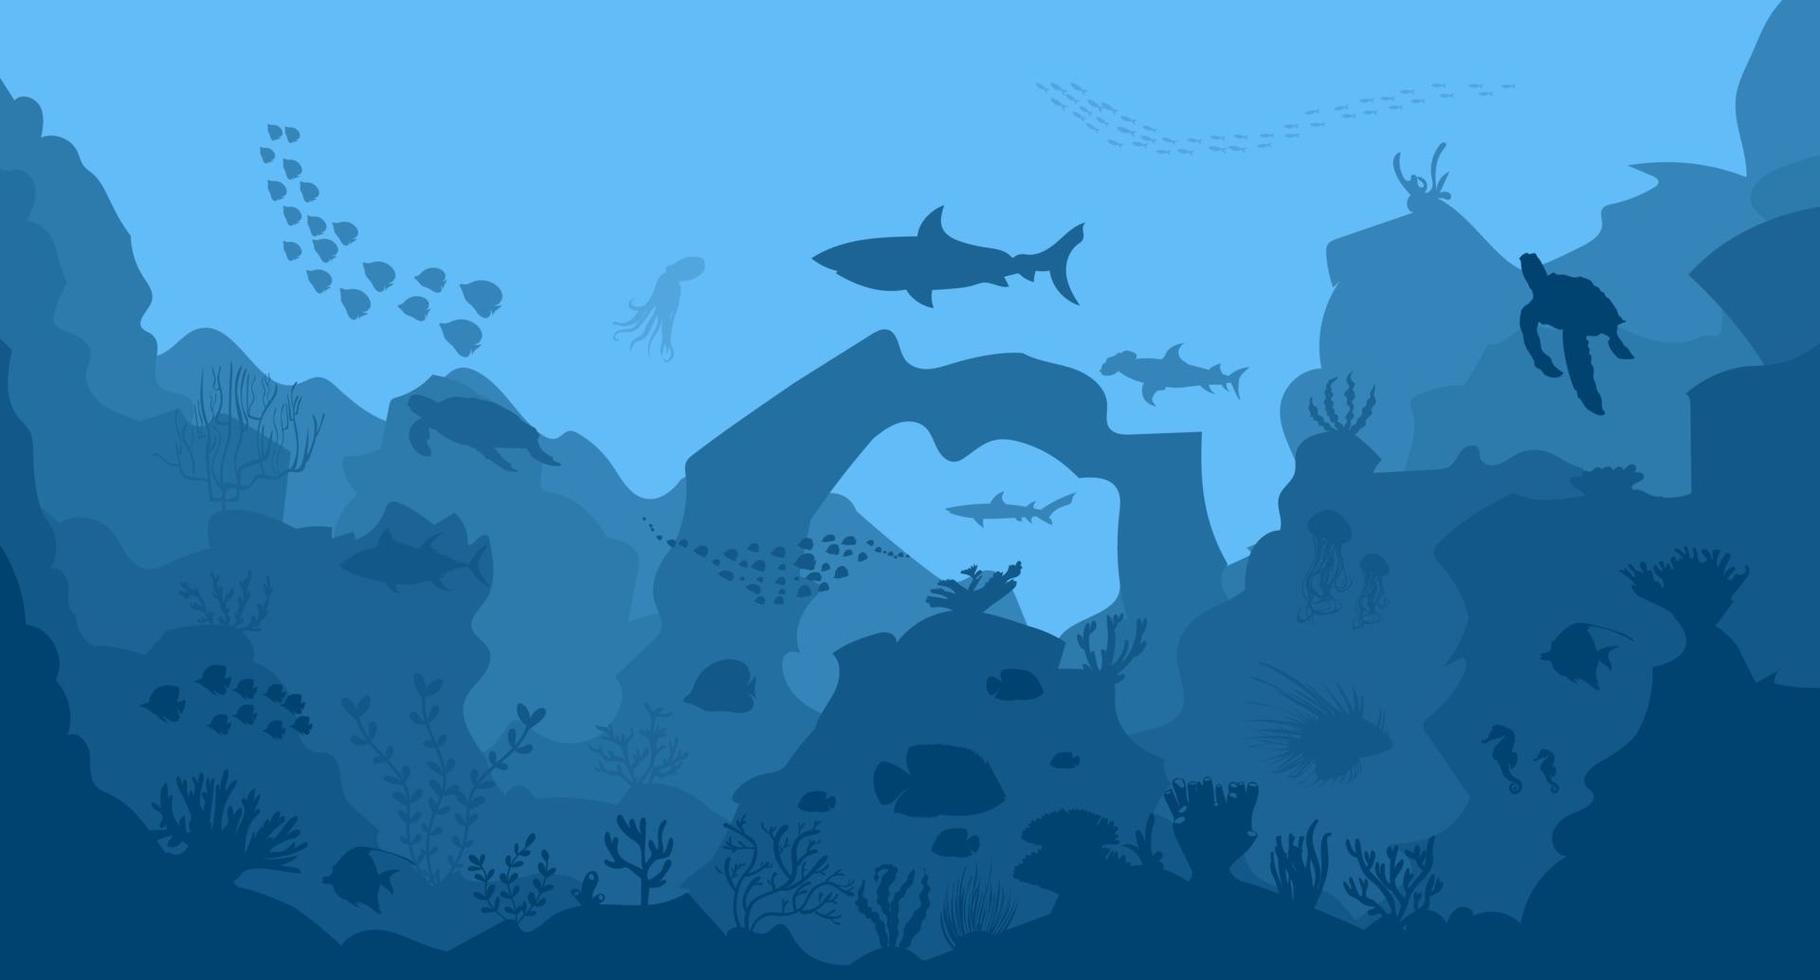 Prsilhouette of coral reef with fish on blue sea background underwater vector illustration